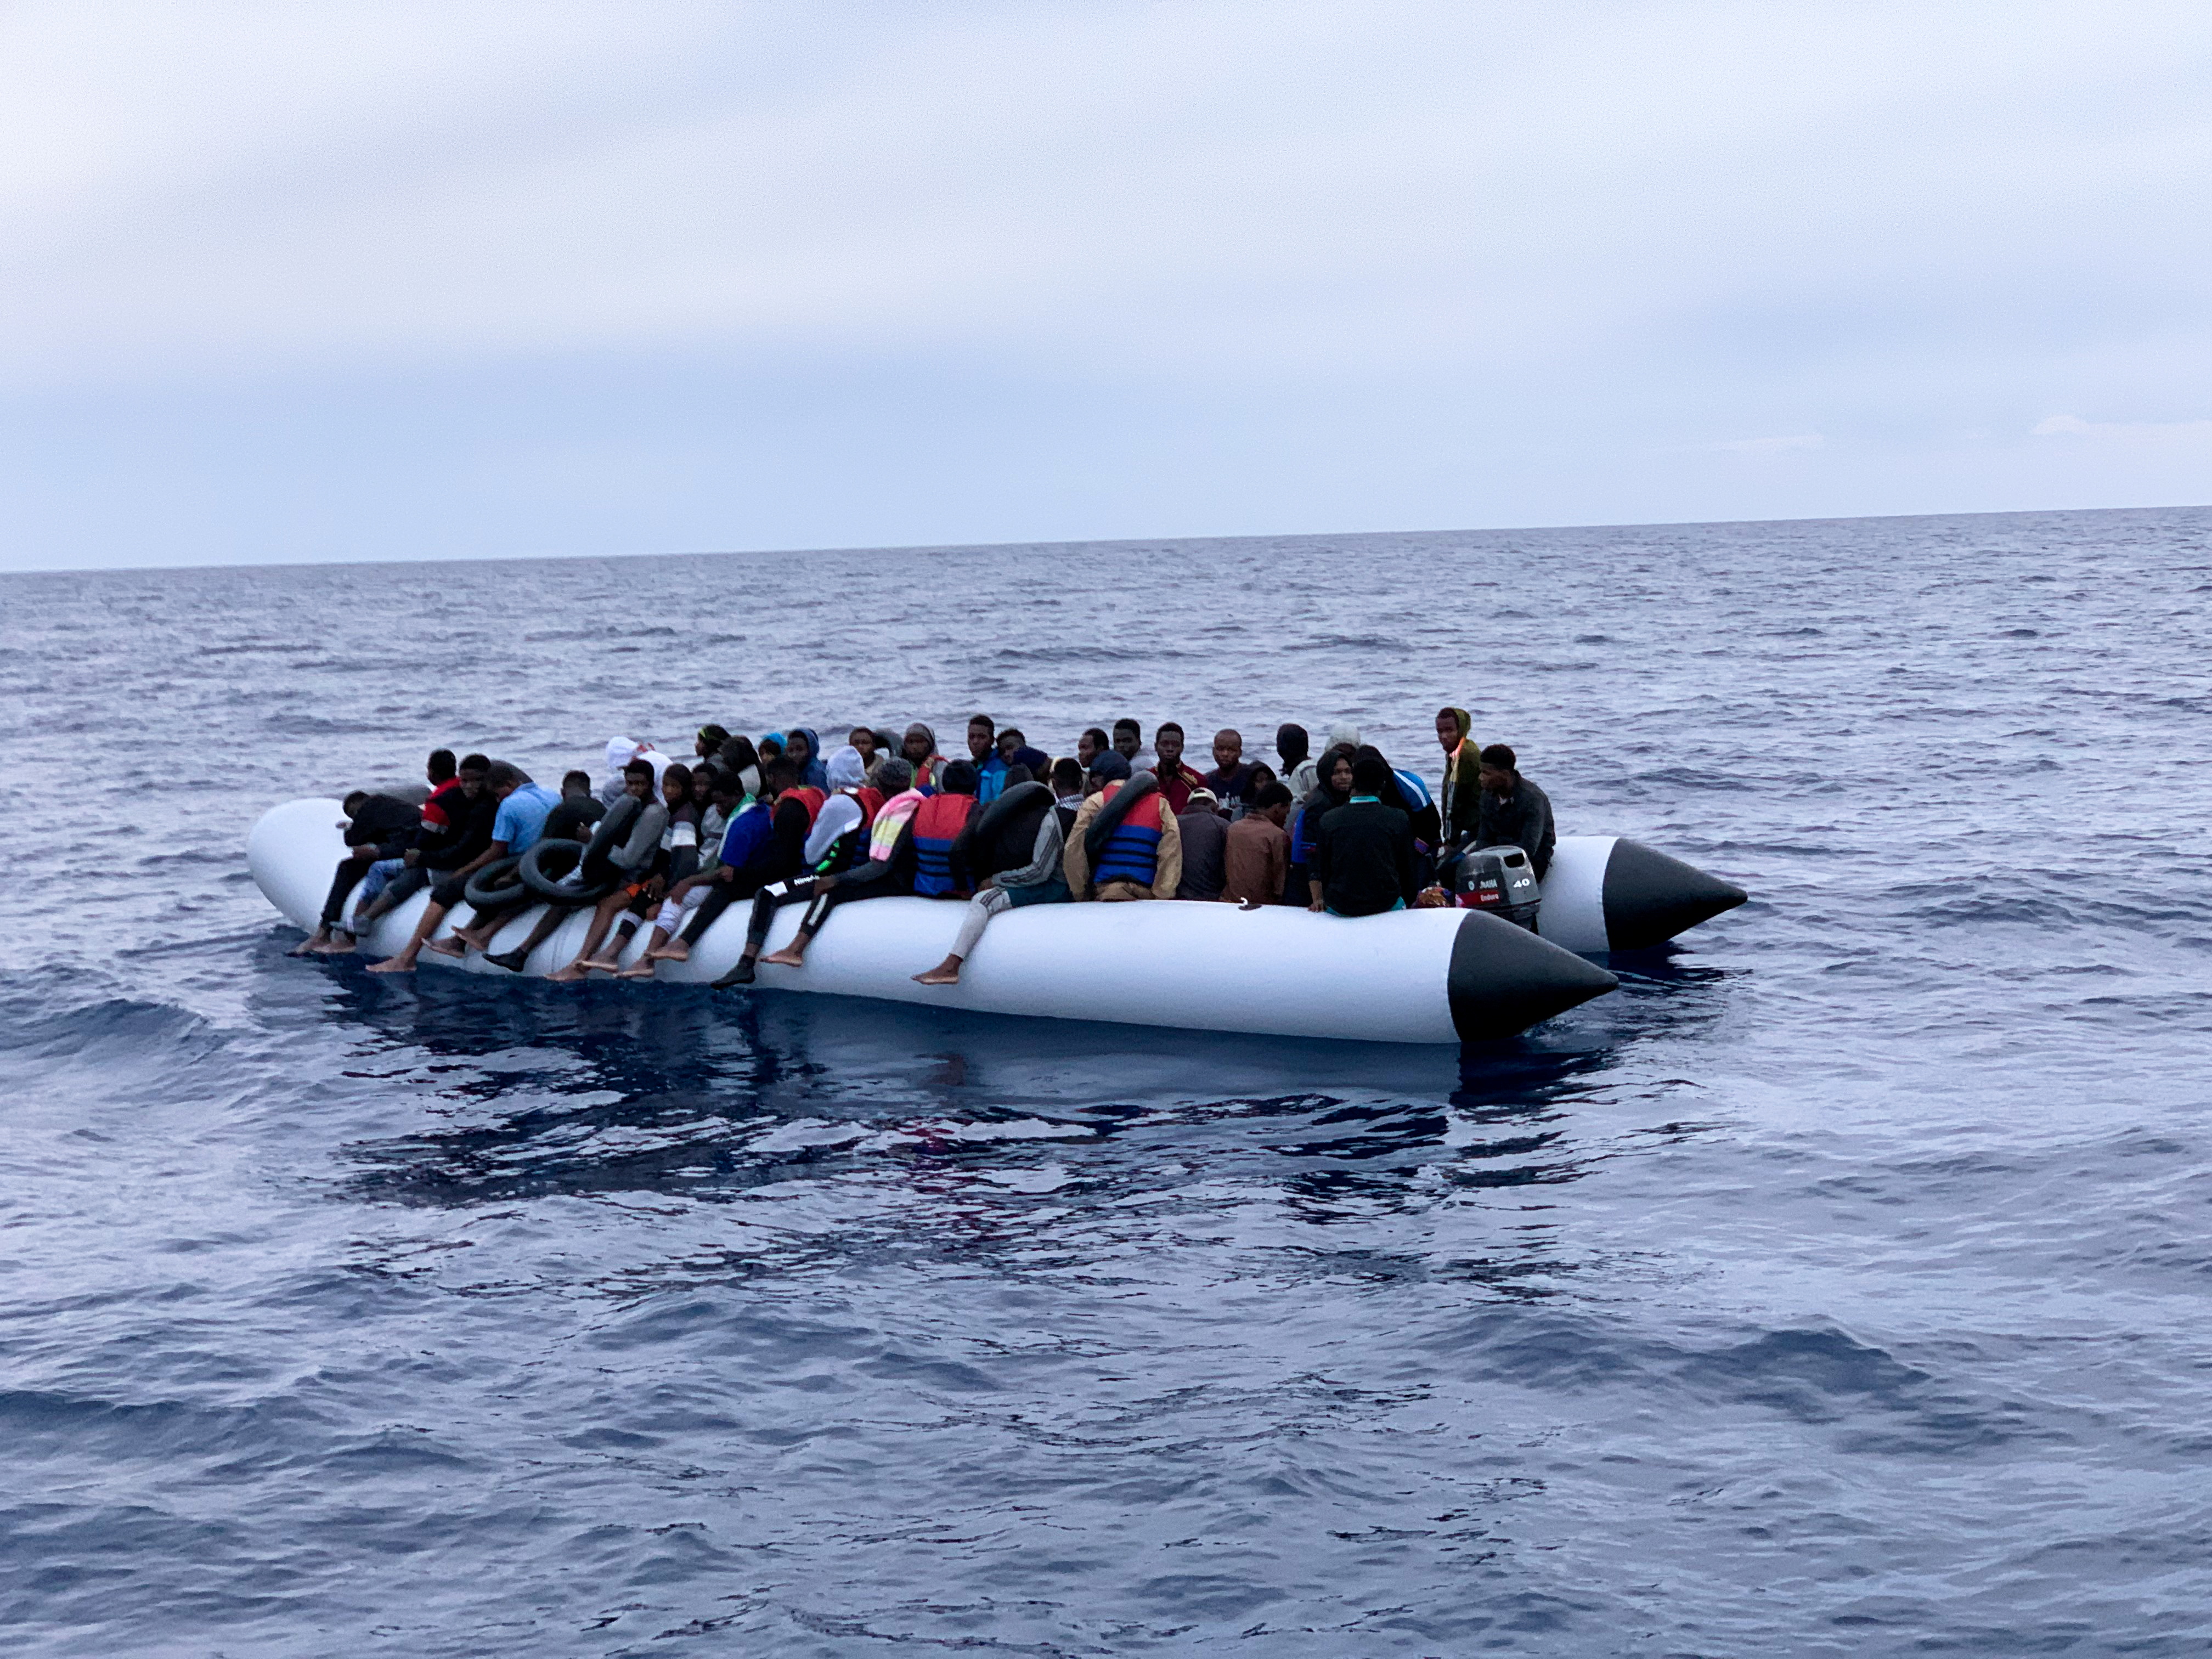 Migrants are seen on a rubber dinghy as Libyan Coast Guards arrive to rescue them in the Mediterranean Sea, off the coast of Libya